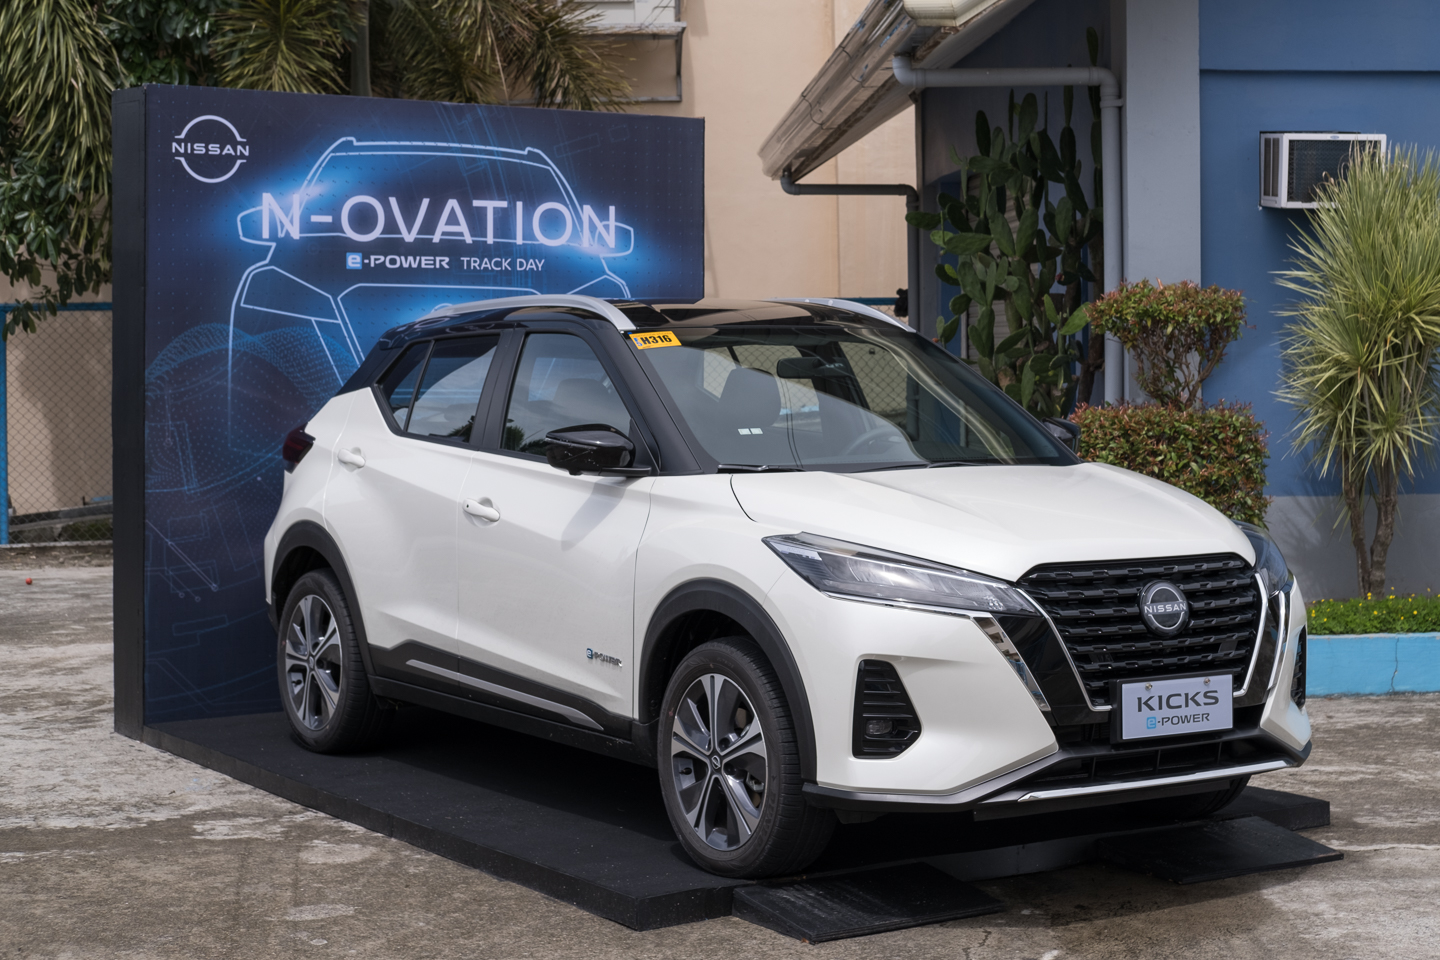 Finally! The Nissan Kicks E-Power is set to launch on August 12